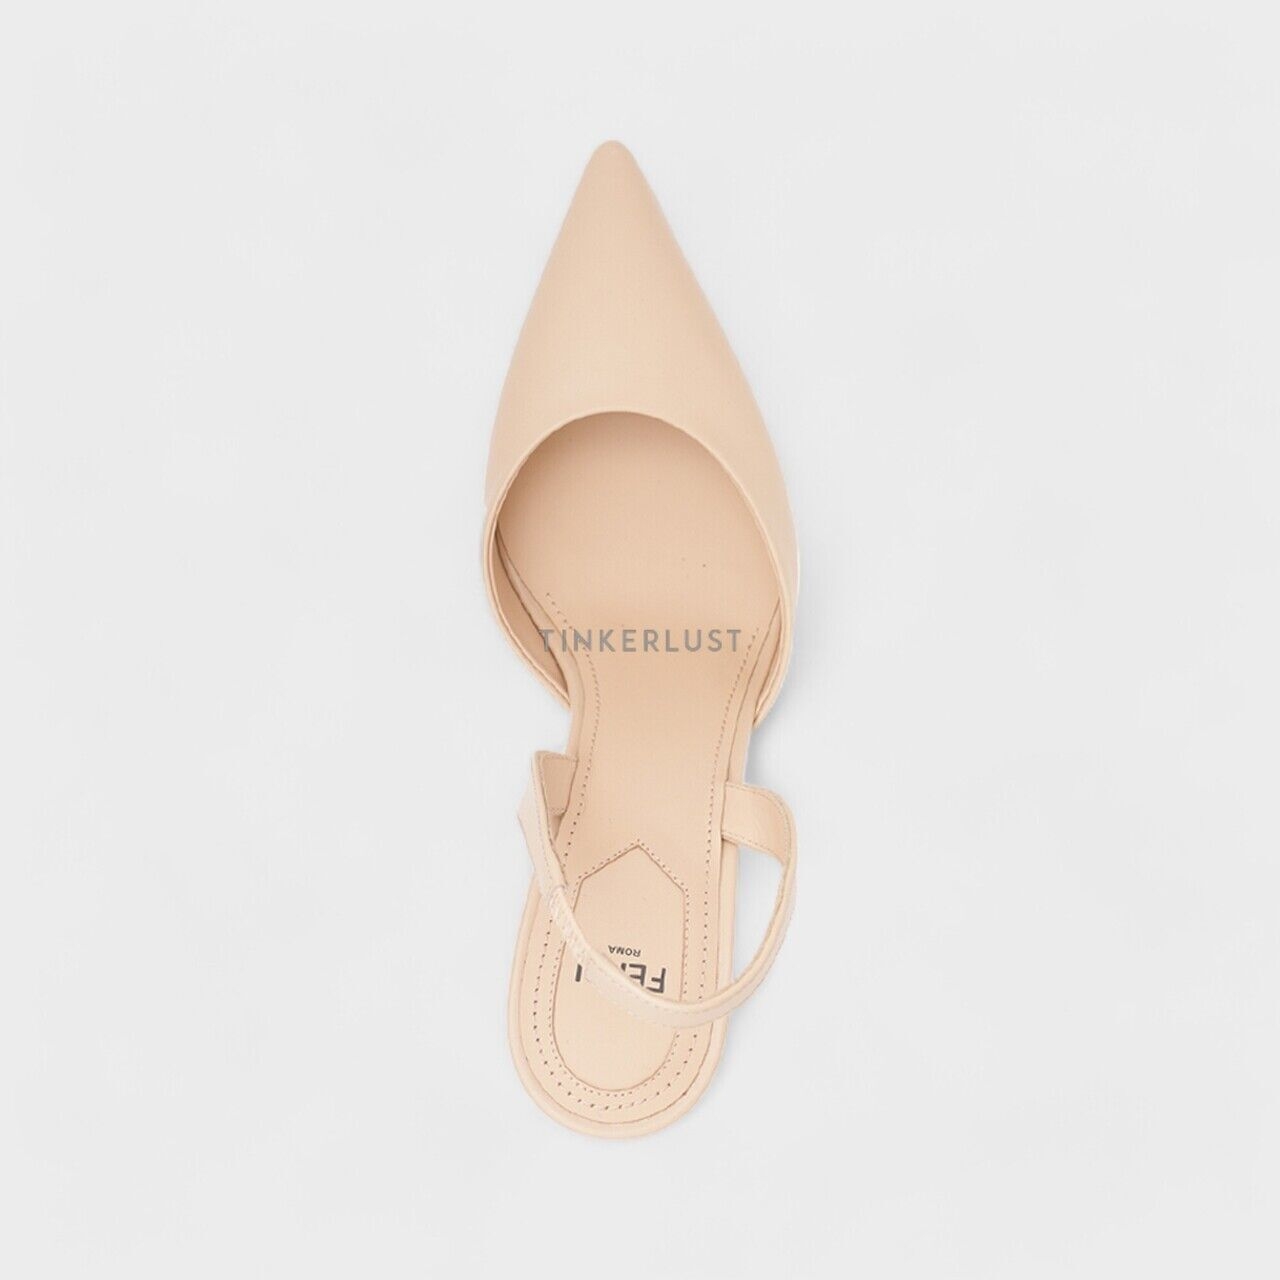 Fendi Women First Slingback Pumps 95mm in Pale Pink Leather with Diagonal F-Shaped Heels